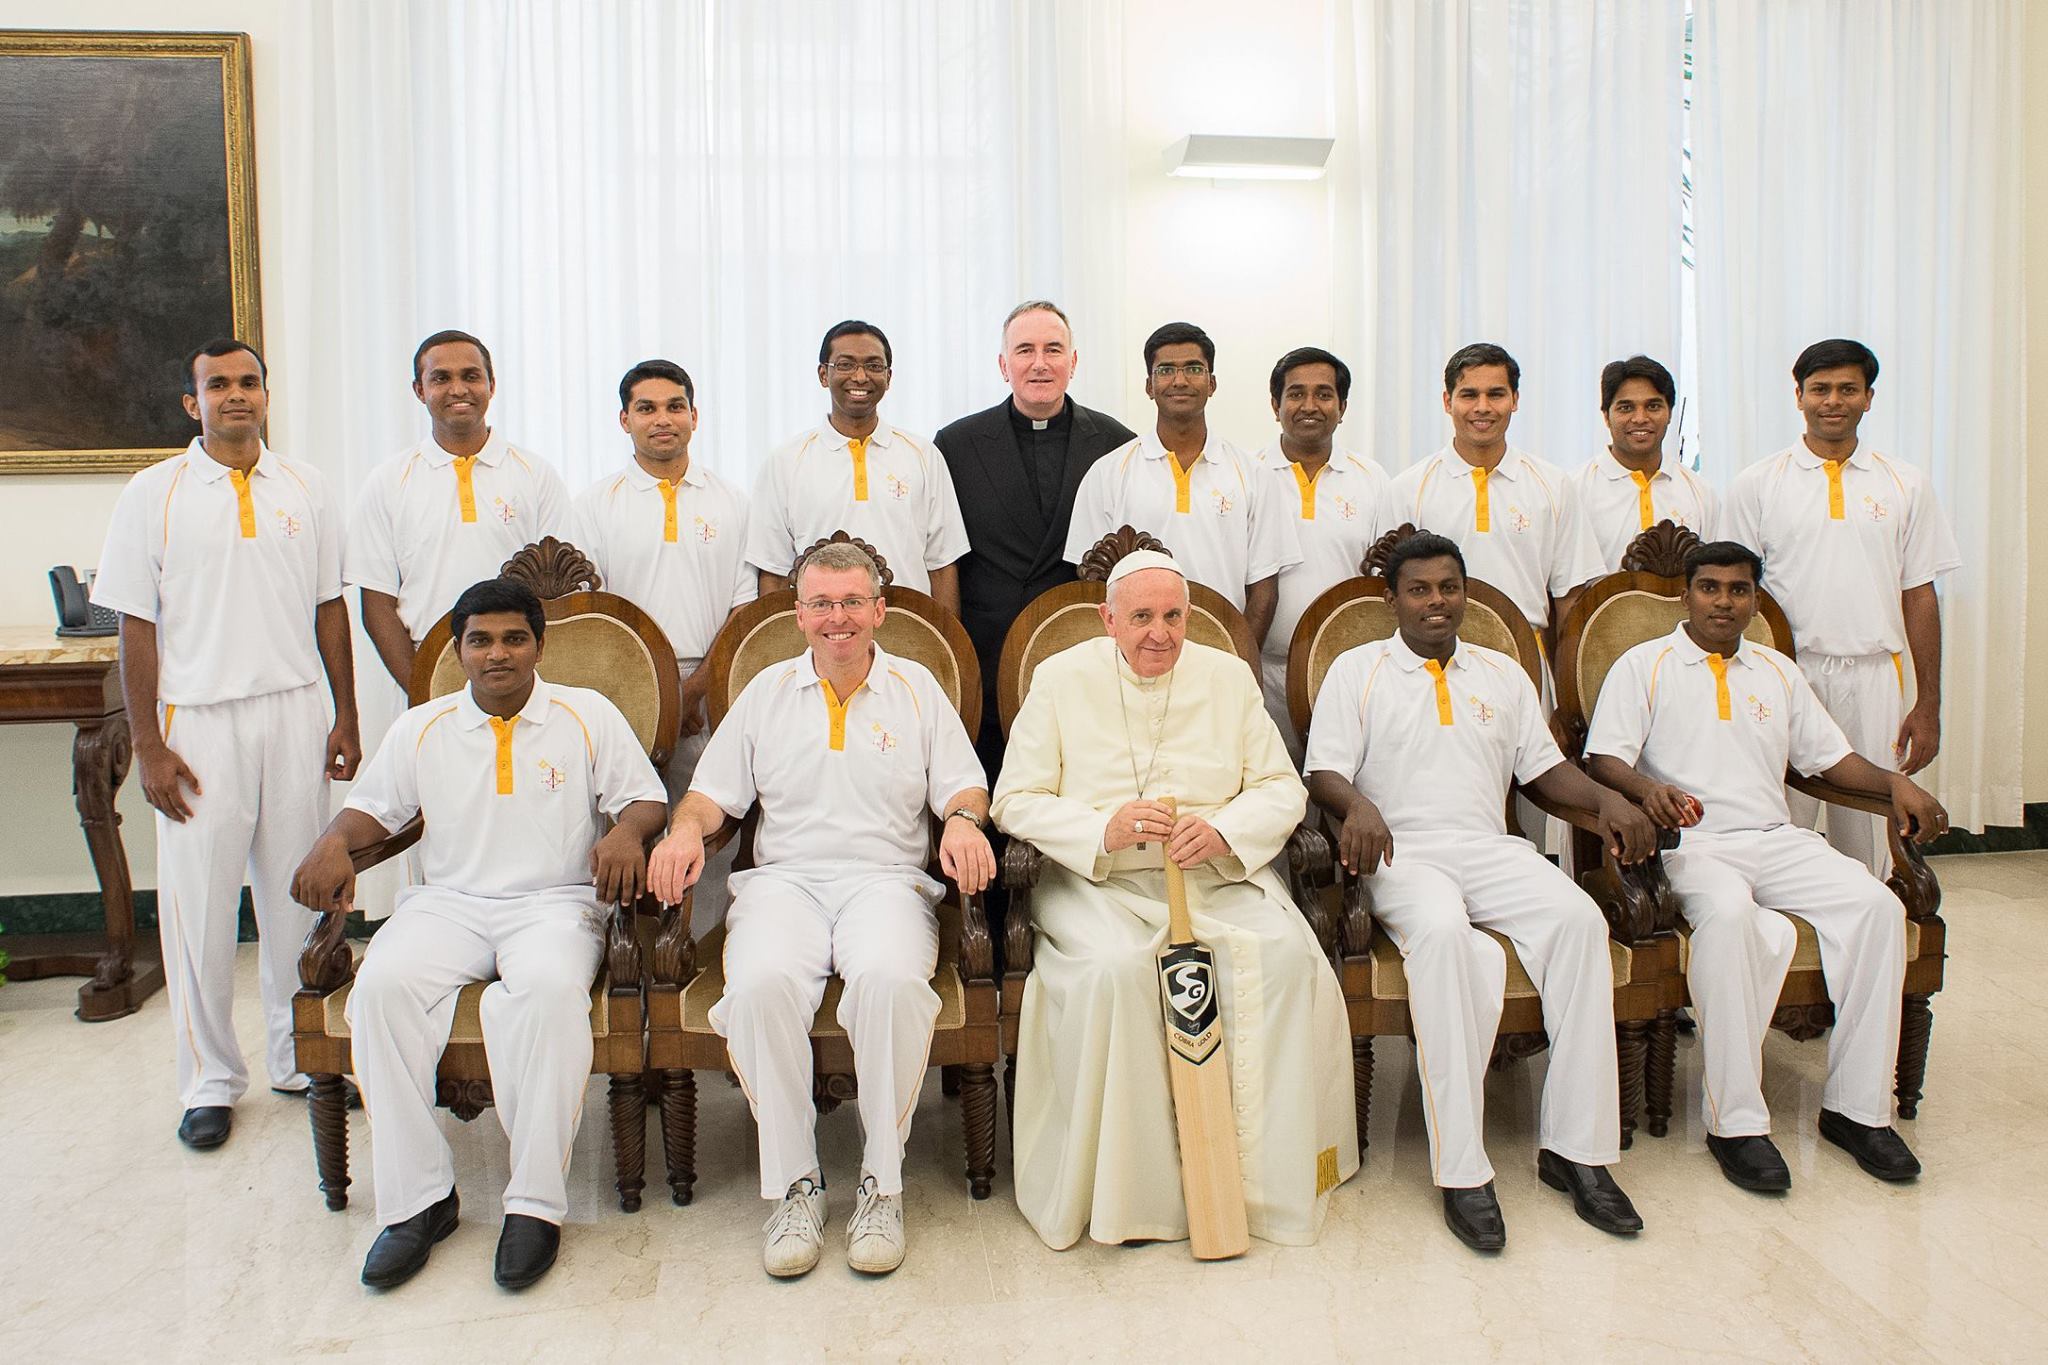 Cardinal Ravasi of the Pontifical Council for Culture presented the priests and seminarians of the St Peter's Cricket Club to Pope Francis on 9 September ahead of their Light of Faith Tour to England (12-20 September 2014), which culminates in a match against an Anglican, Church of England XI. Together with the cultural encounter experience of visiting London and Canterbury, they shall be praying at various holy shrines together with our ecumenical partners and raising funds for the Global Freedom Network, which fights against modern slavery and human trafficking.